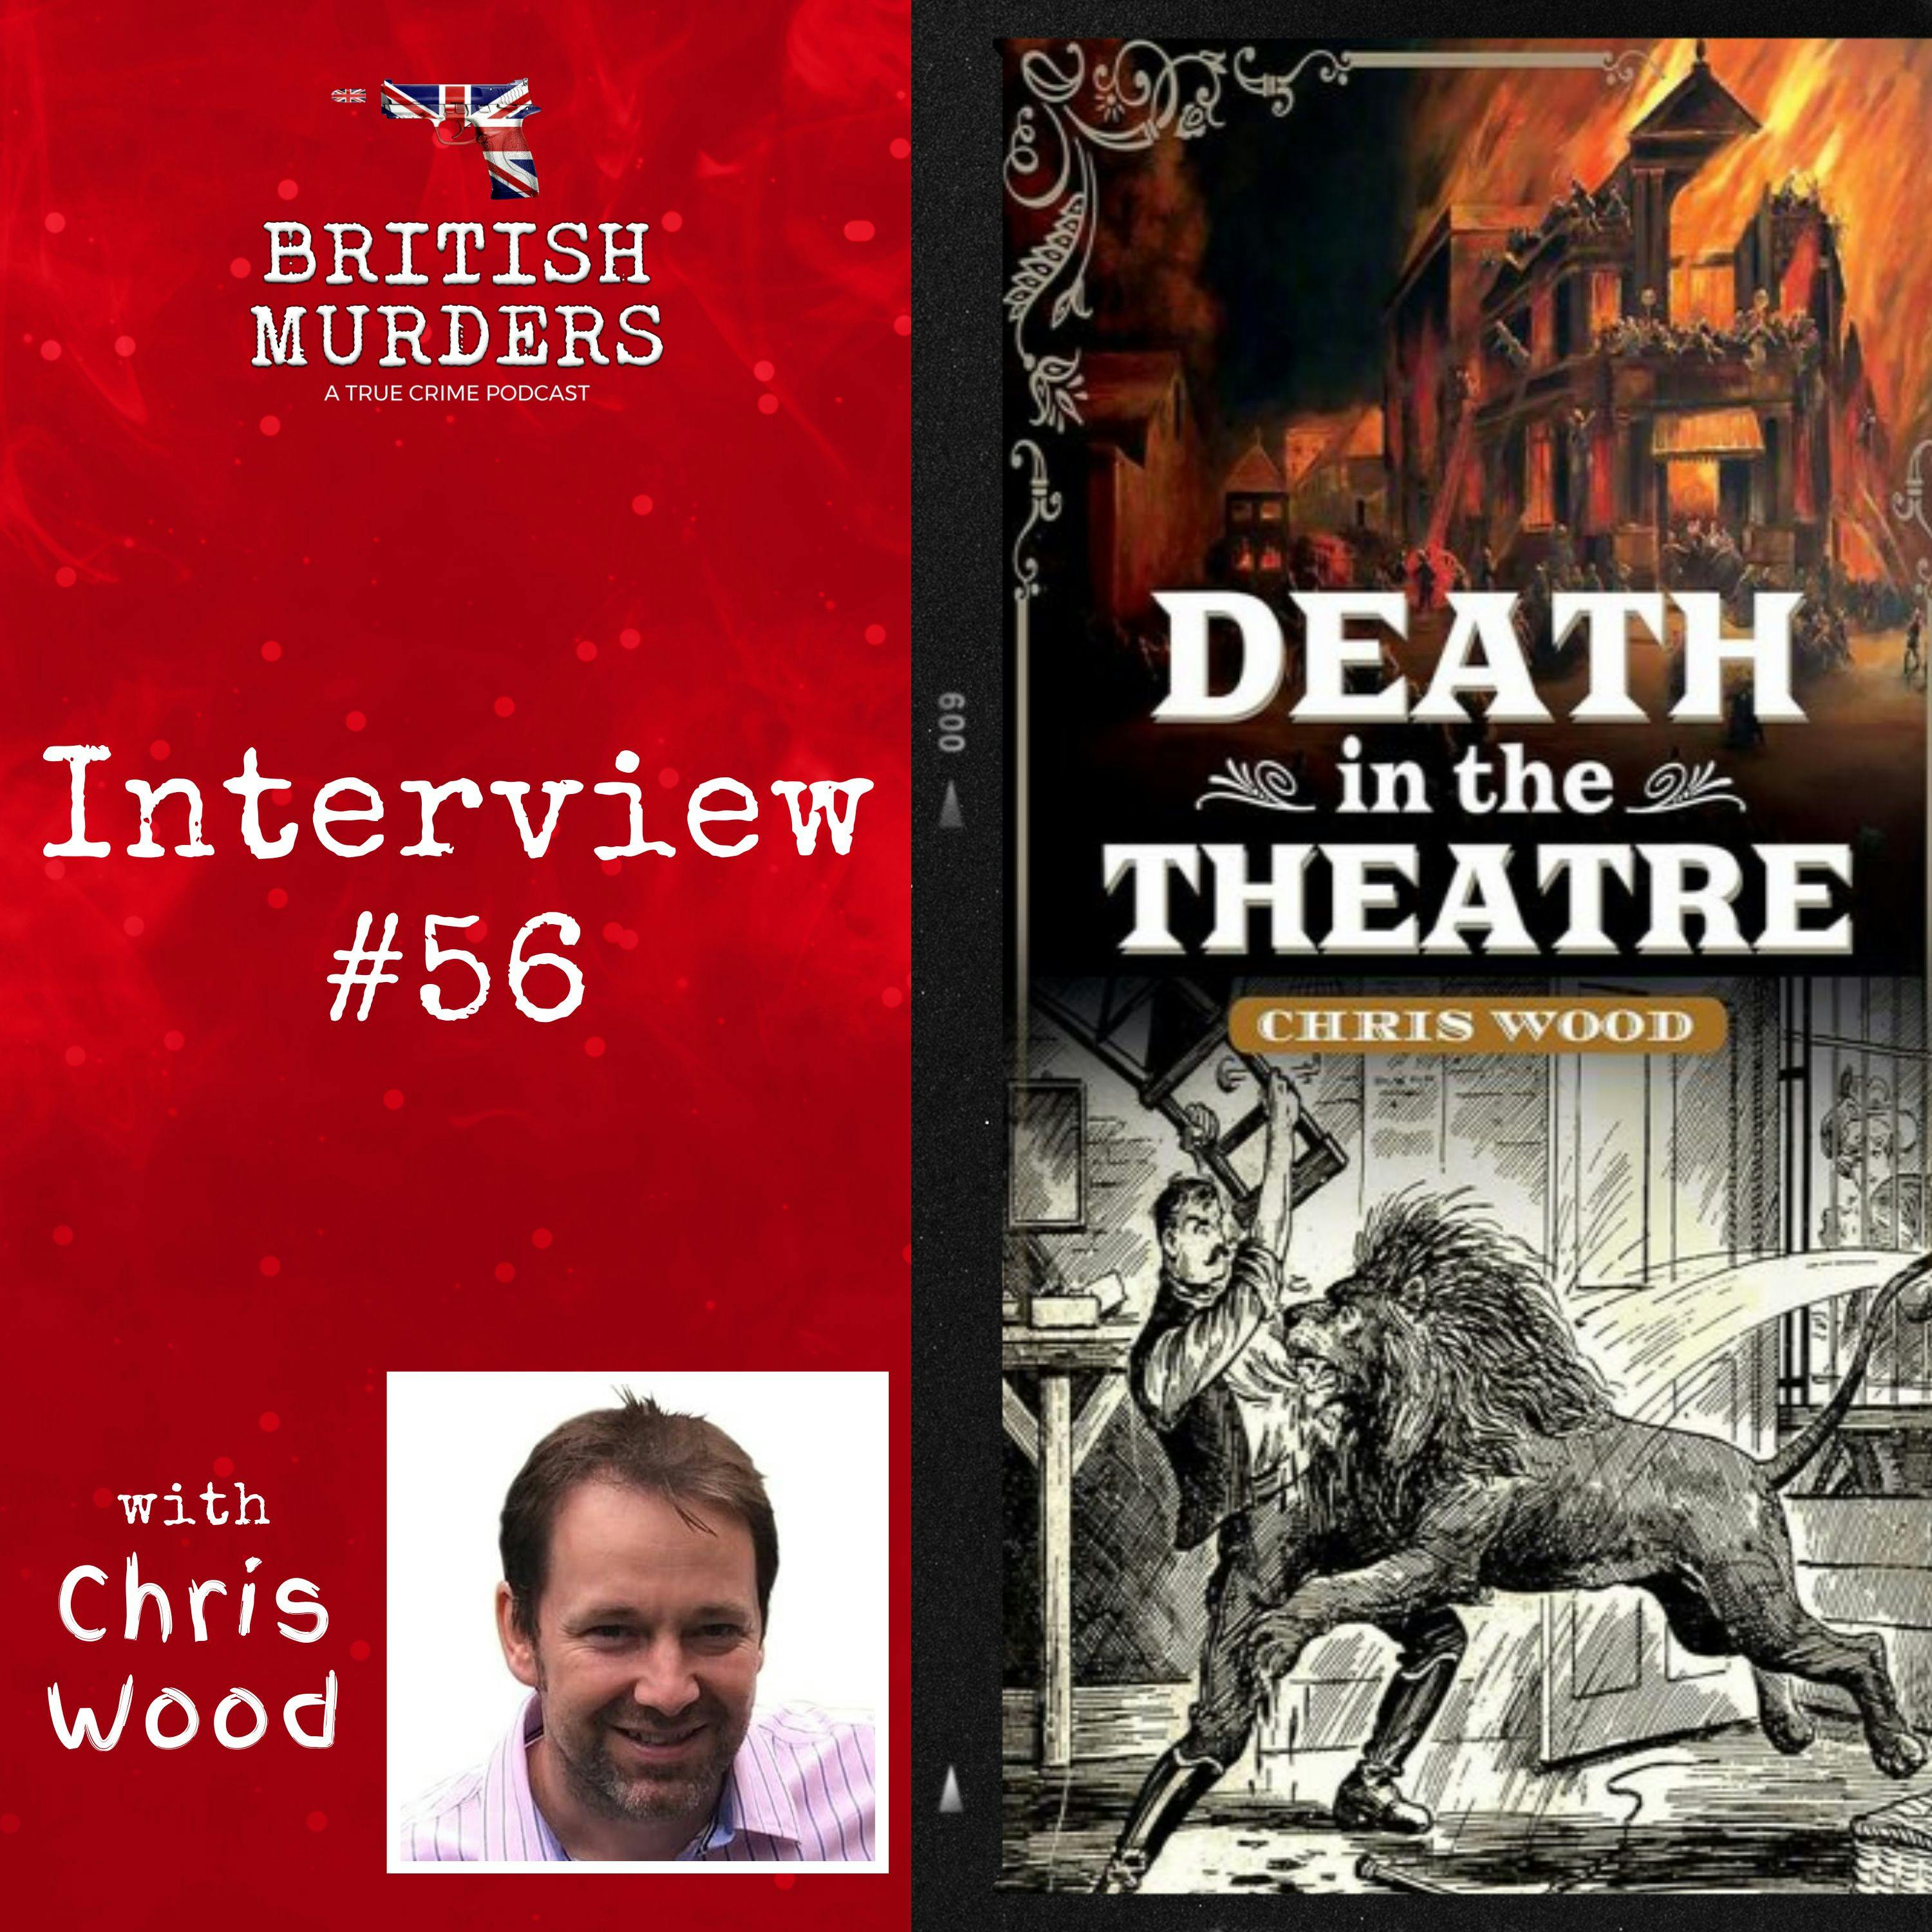 Interview #56 | Death in the Theatre: Chris Wood Discusses His Second Book